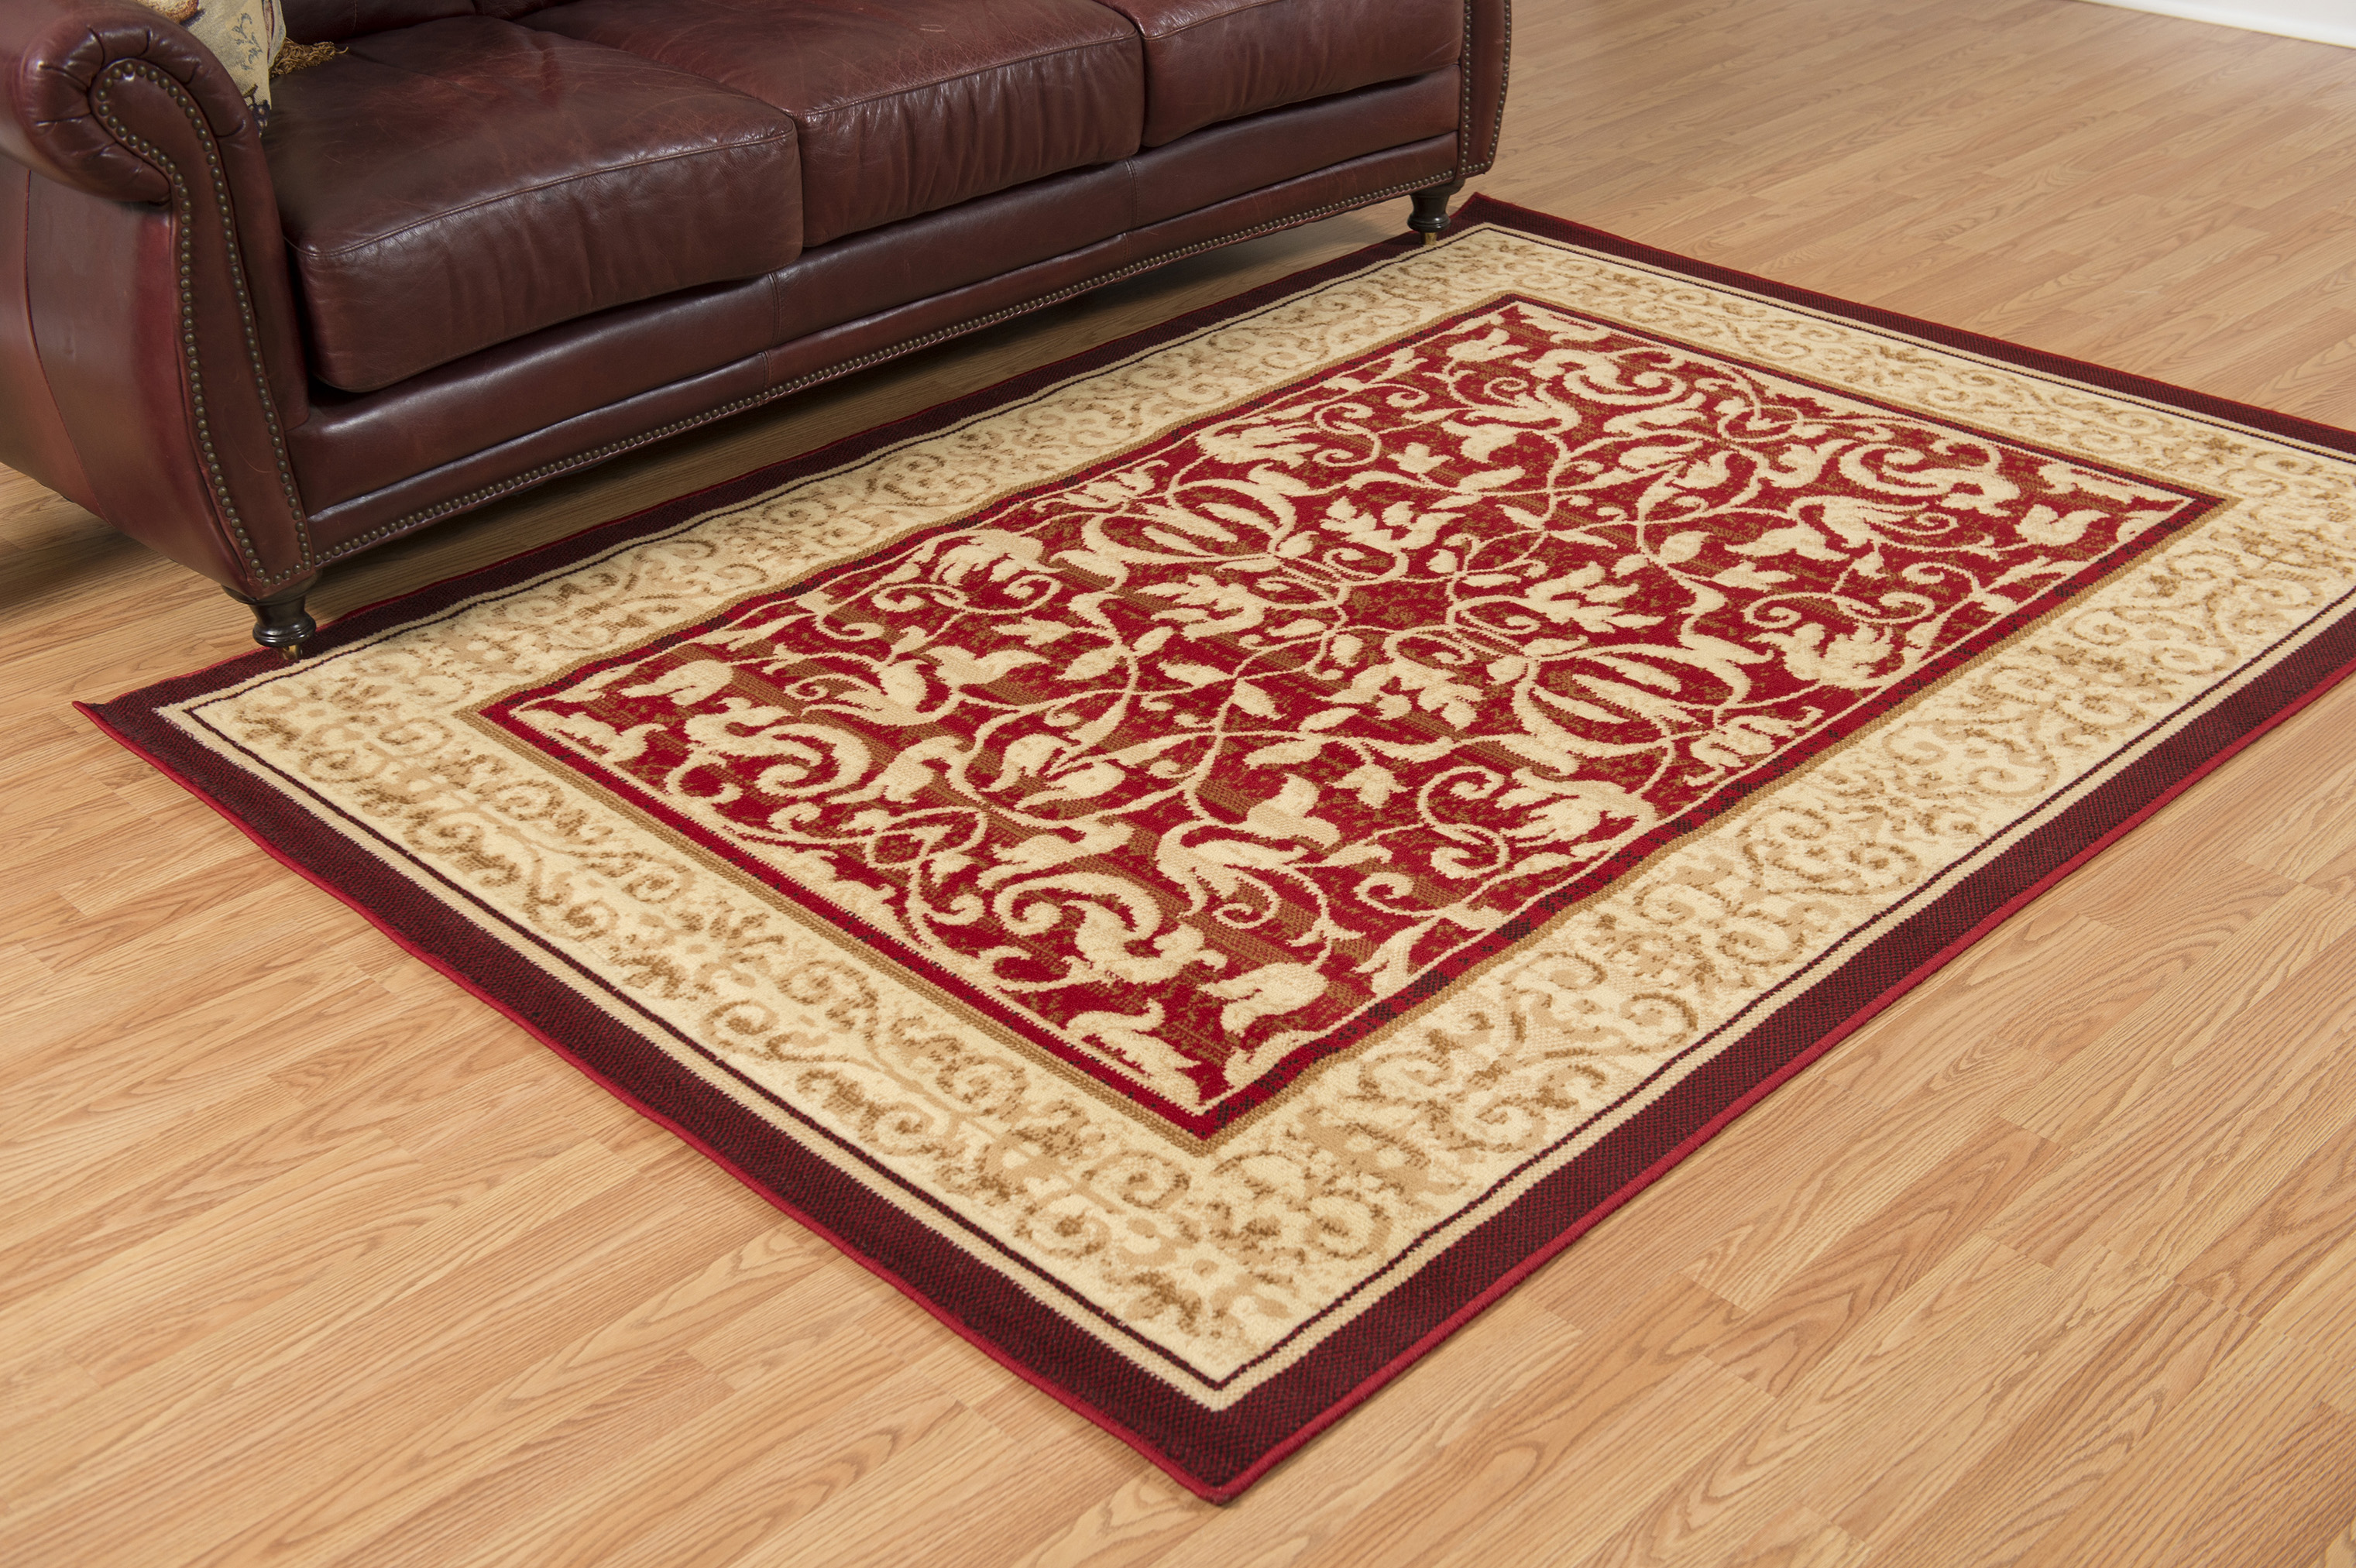 United Weavers Plaza Genevieve Accent Rug, Bordered Pattern, Red, 1'11" X 3'3" - image 2 of 6